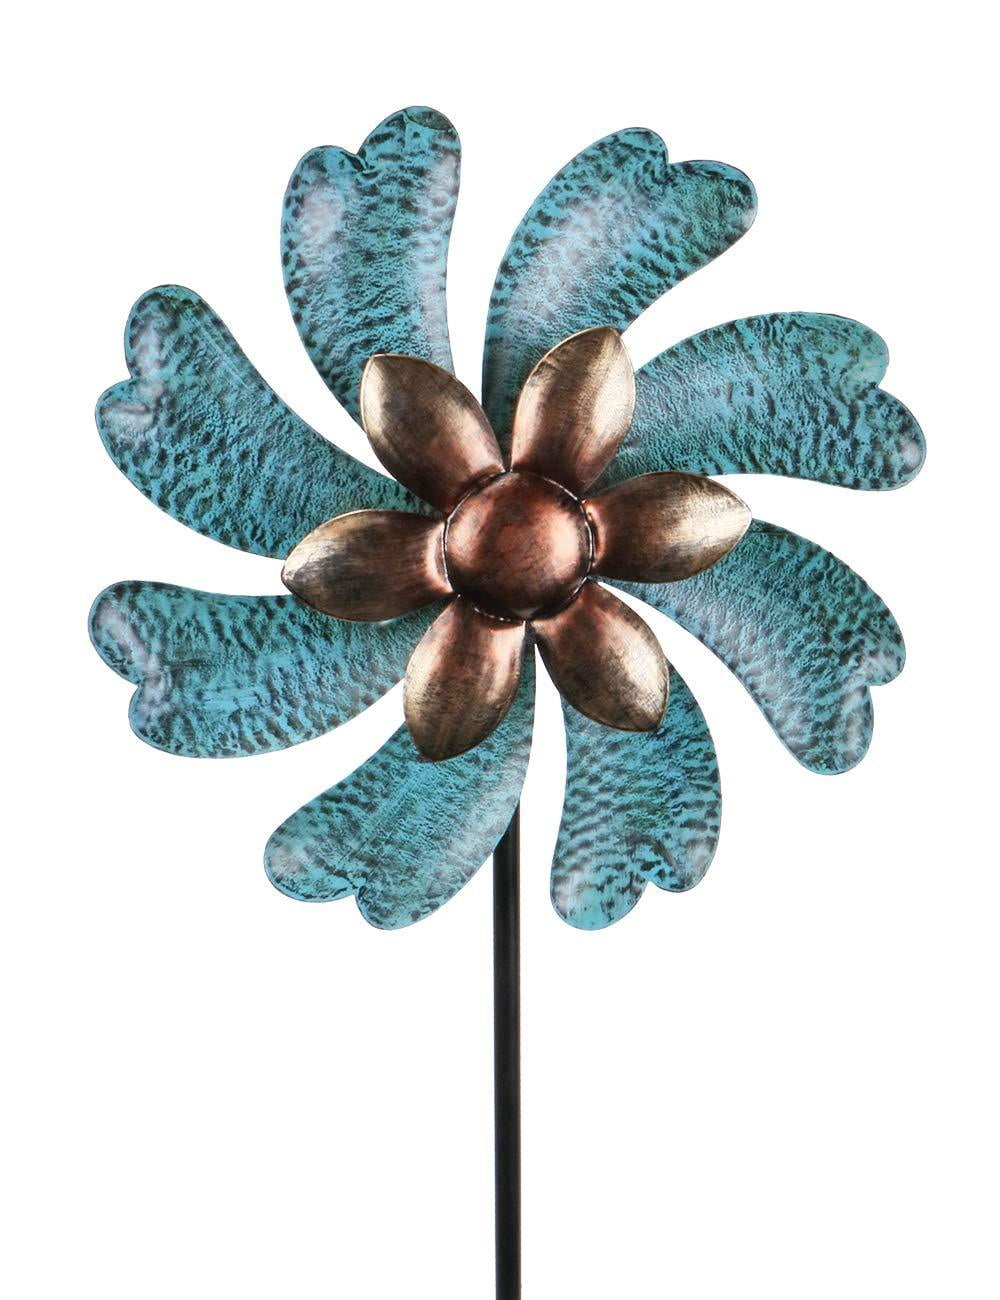 Wind Spinner 15 Colorful Wind Sculptures for Patio Lawn and Garden Let You Feel Different Visual Effects and Relax Your Mood